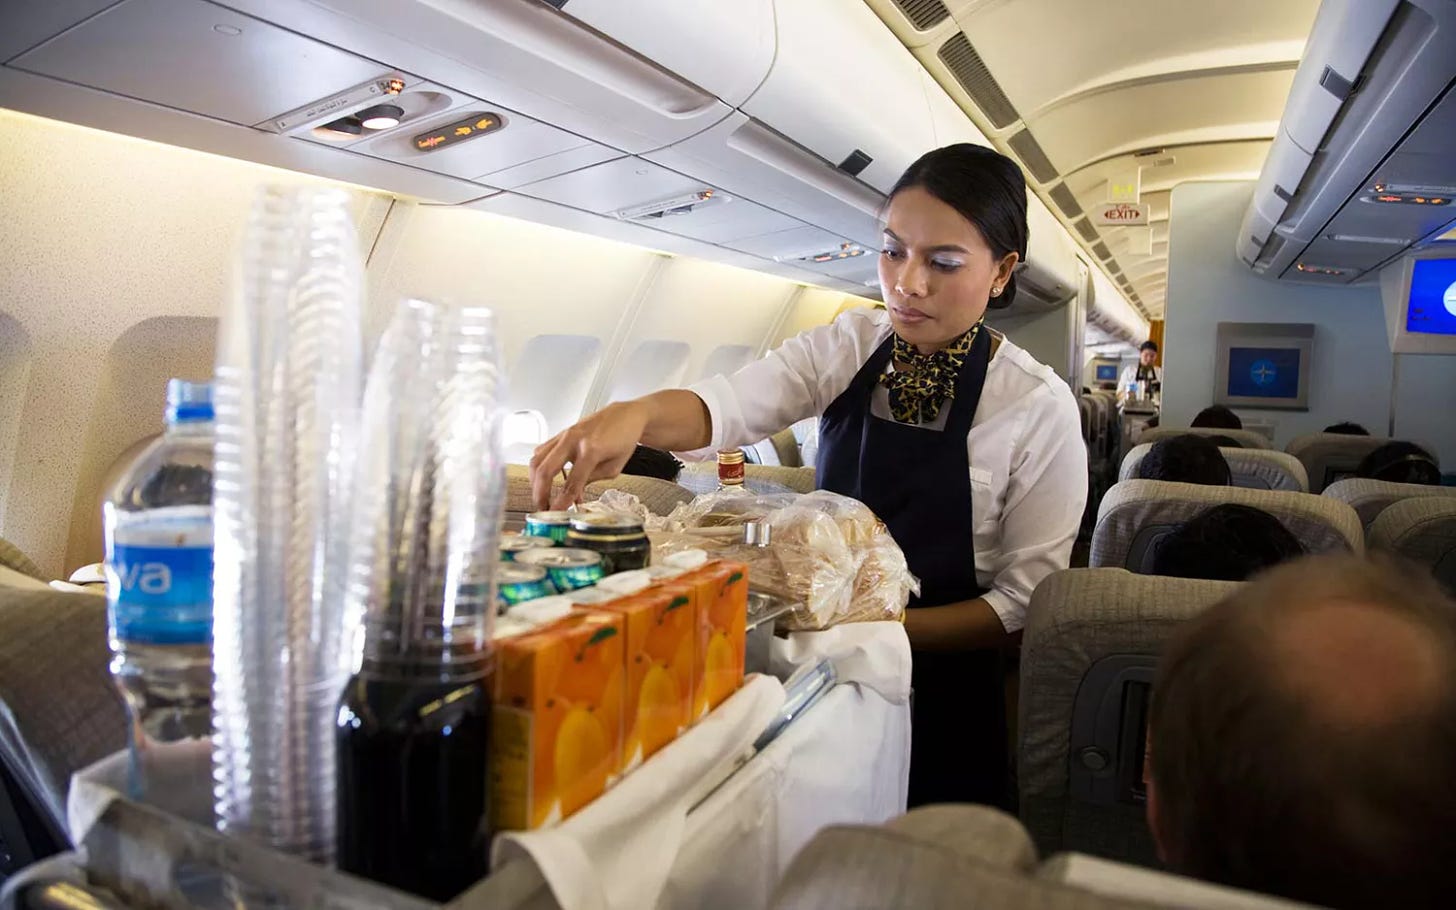 Cabin crew / air stewardess serves drinks to passengers from a beverage cart during a flight